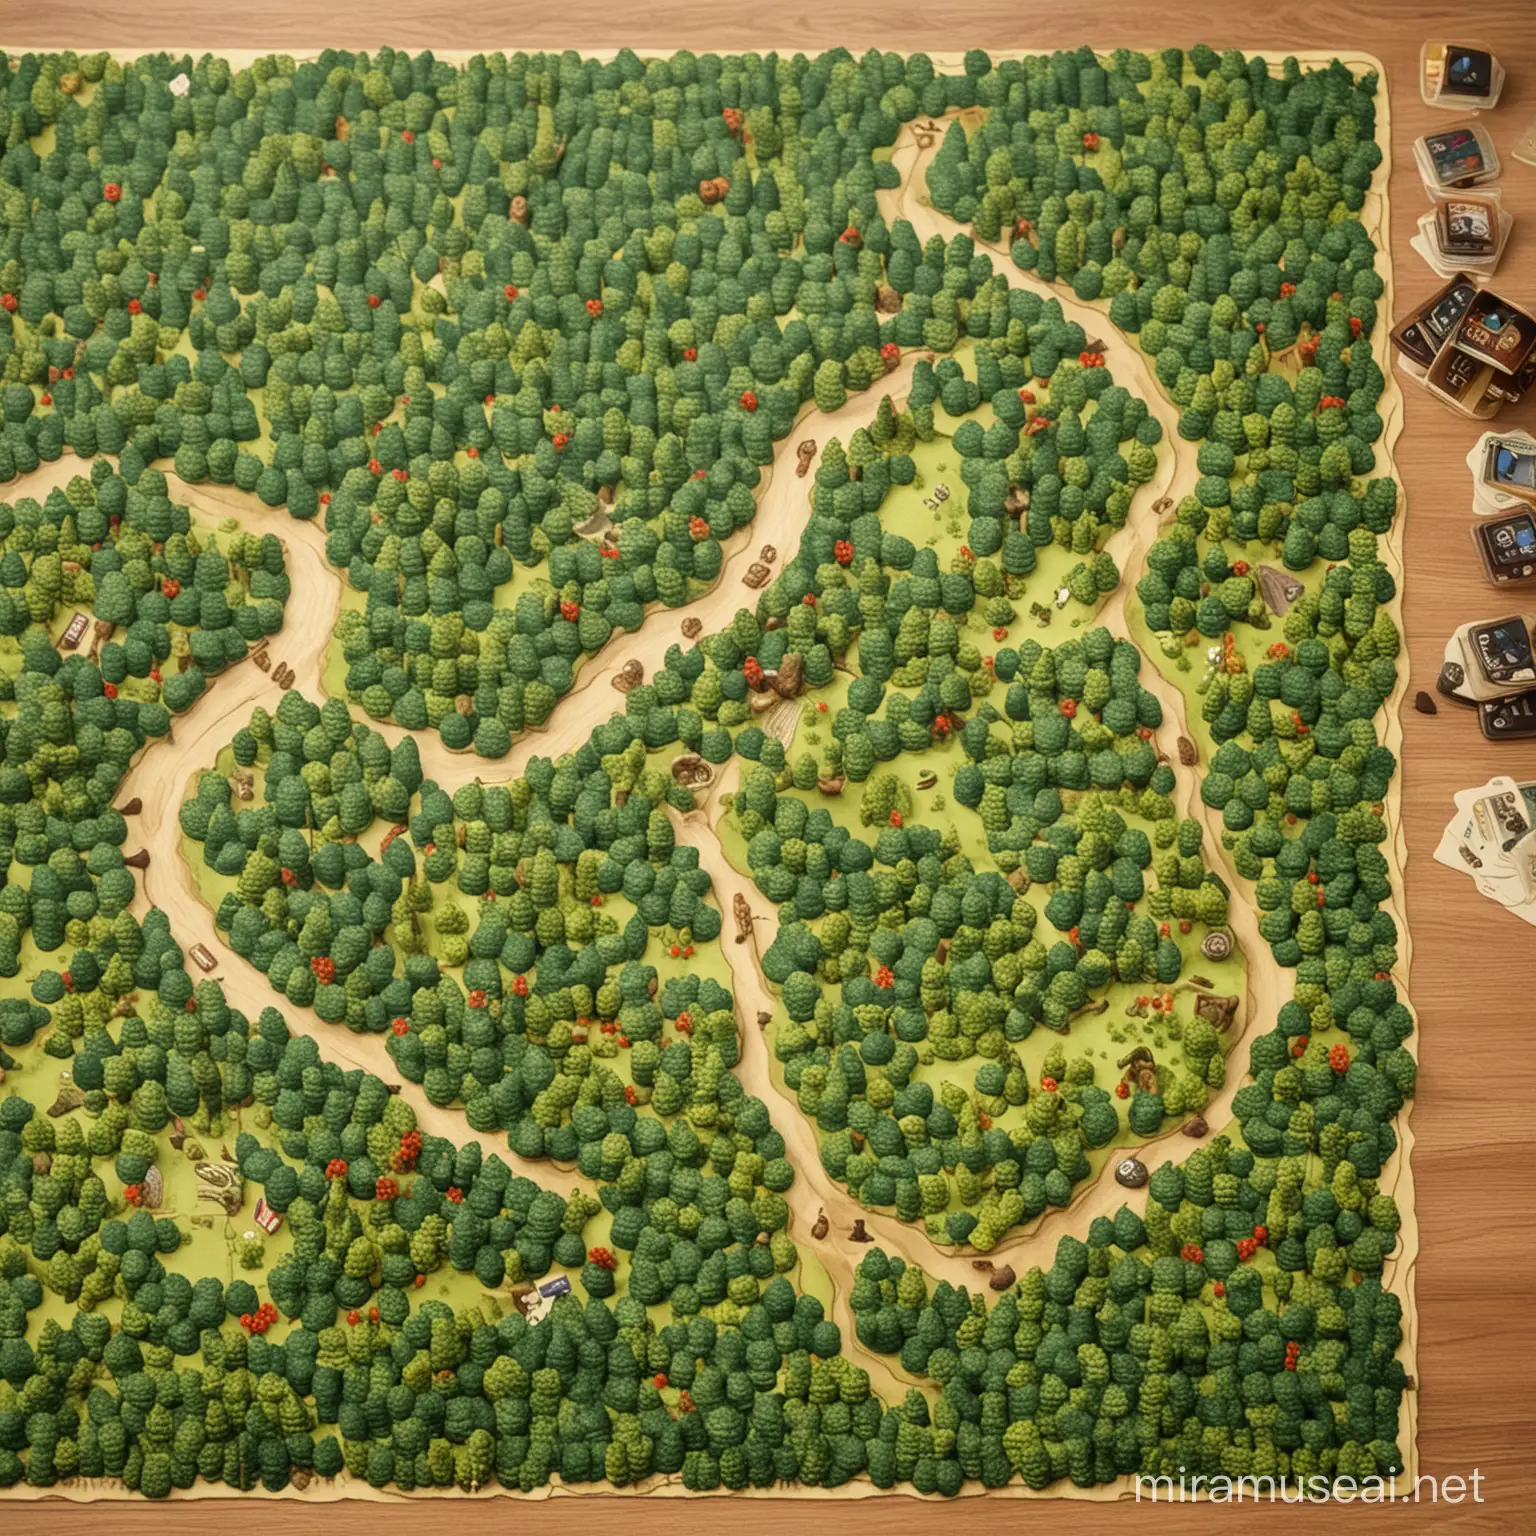 Make a forest map for a board game